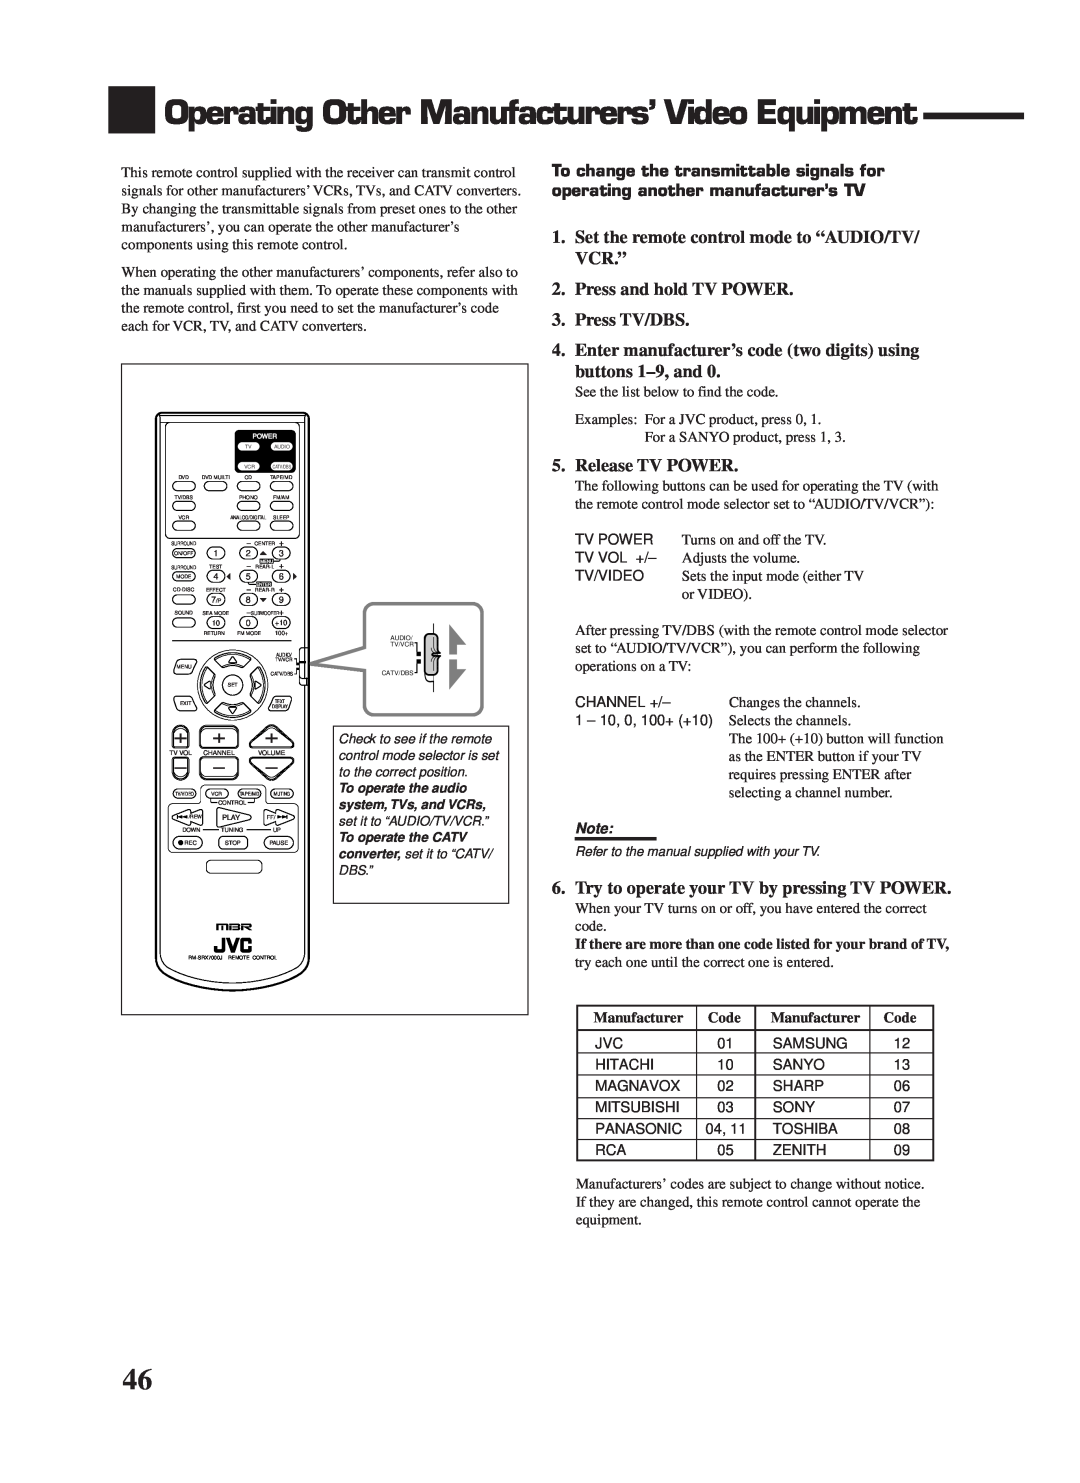 JVC RX-7000VBK manual Operating Other Manufacturers’ Video Equipment, Code 